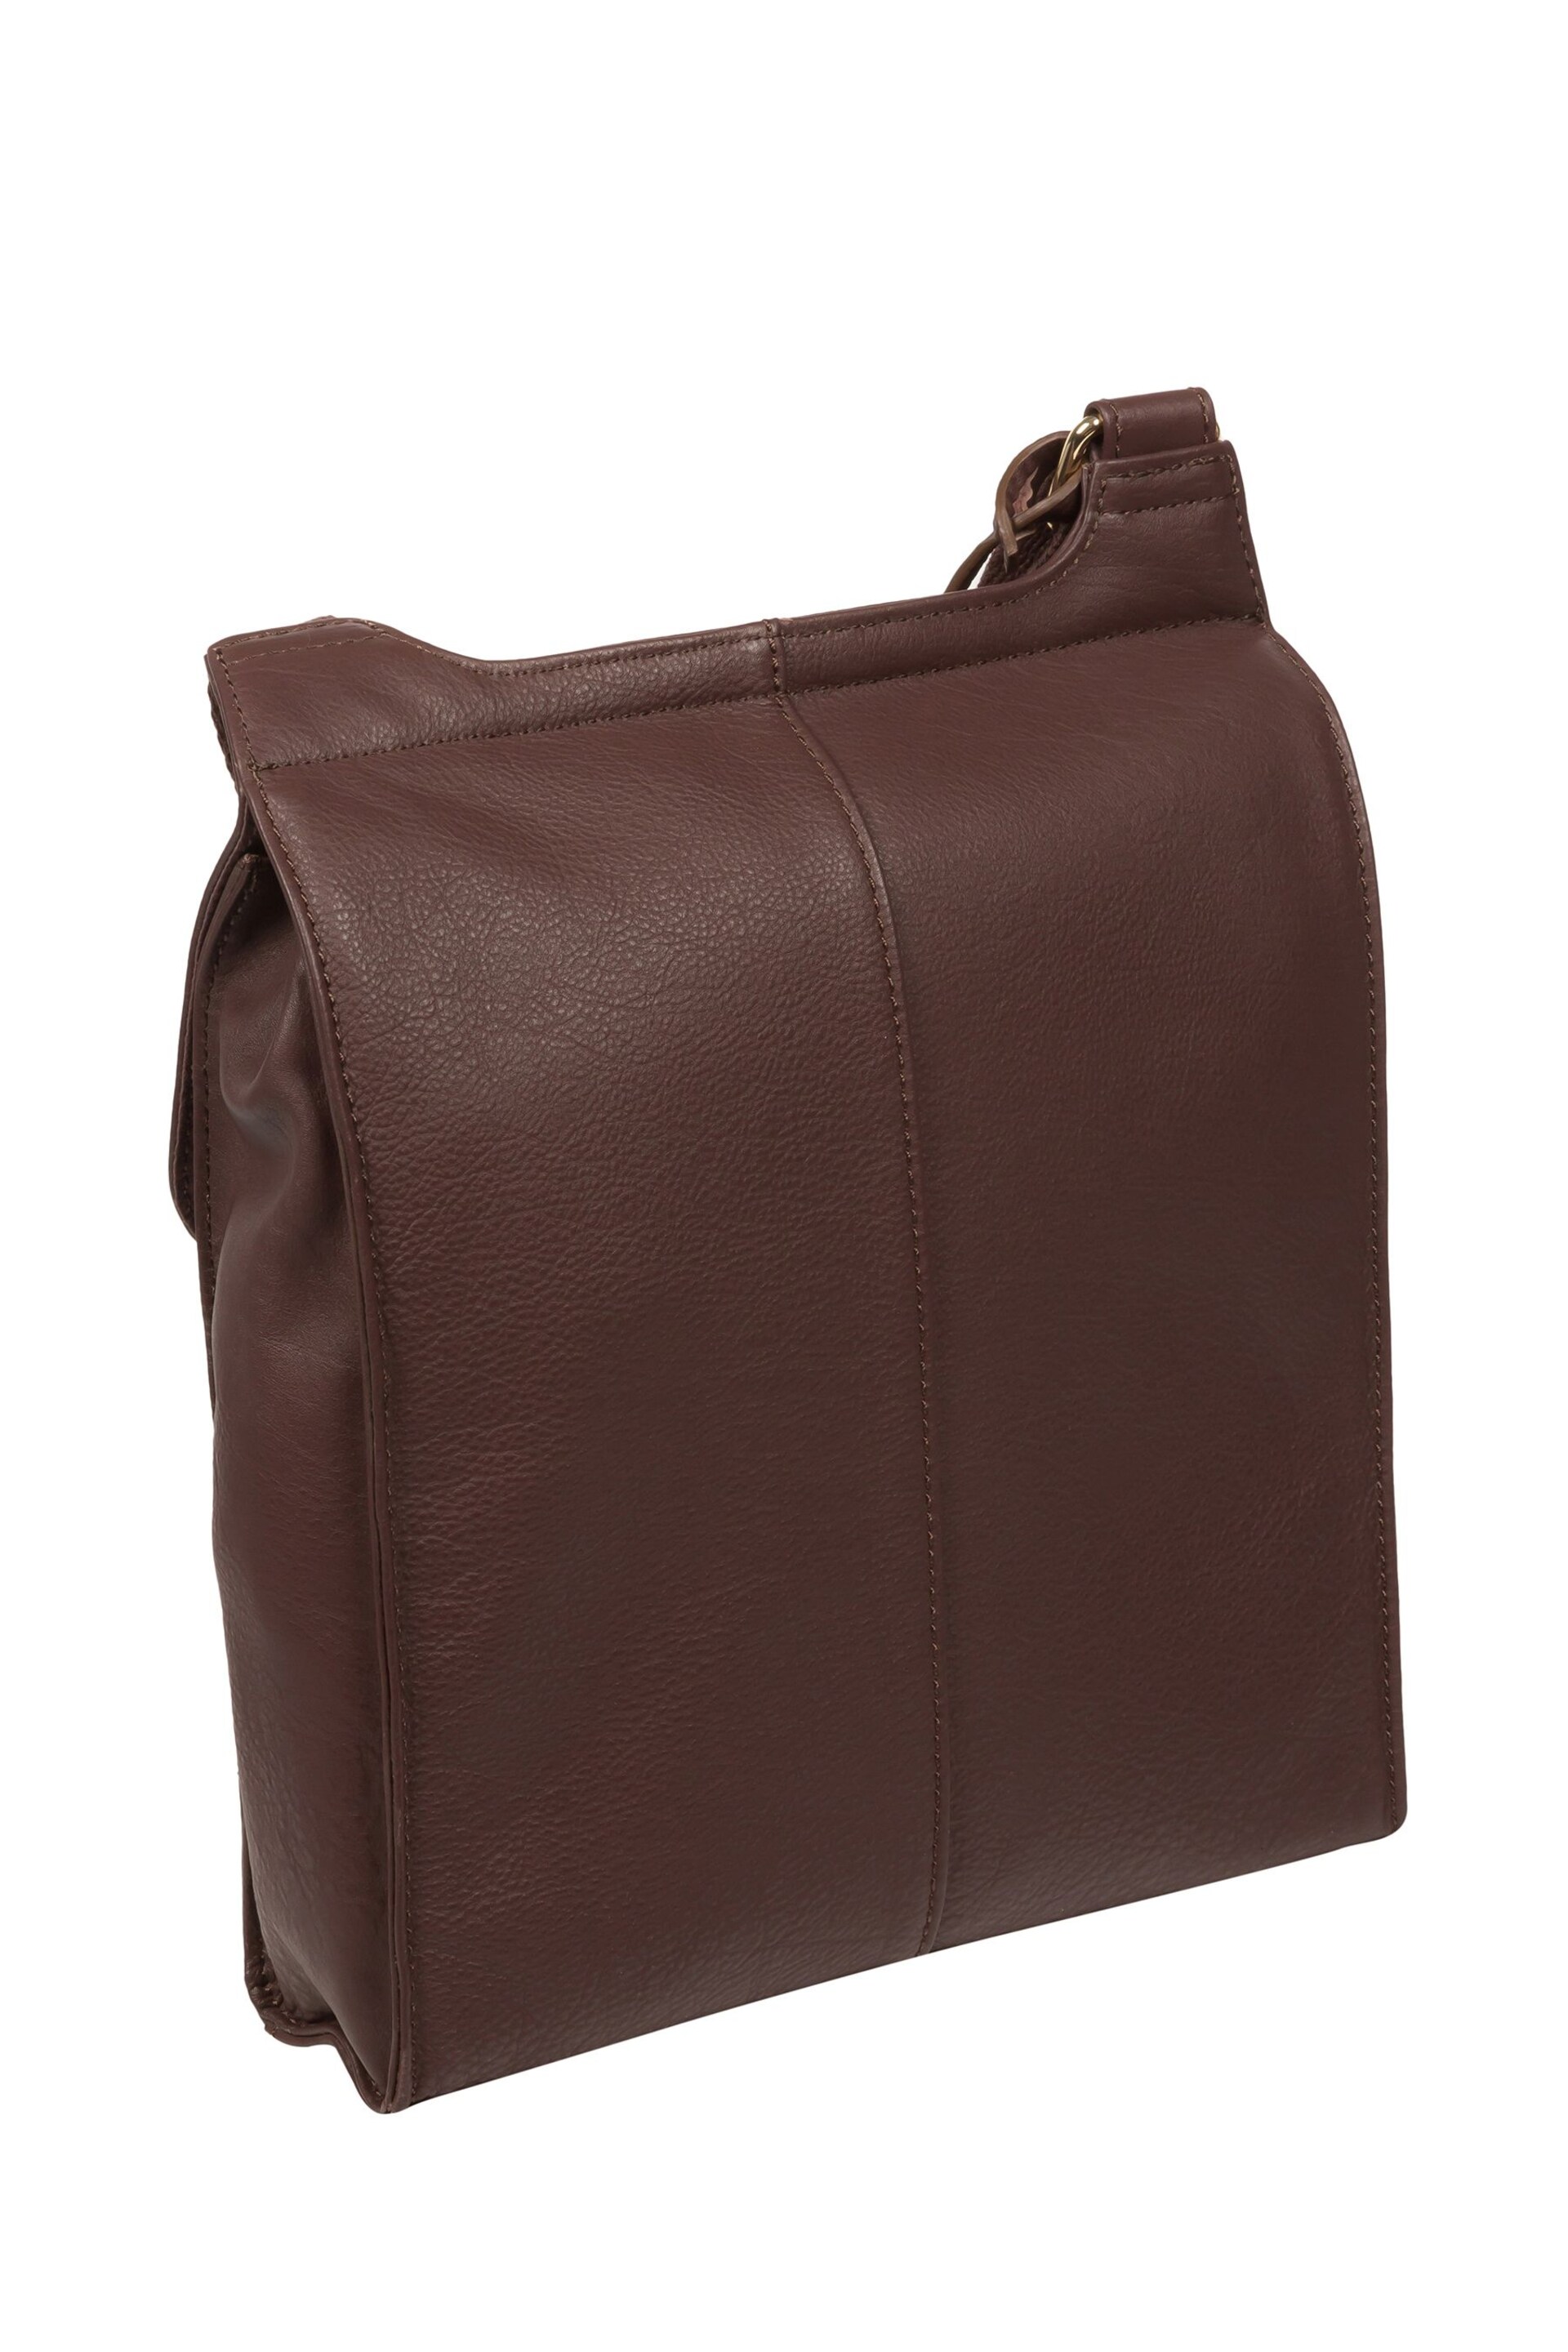 Cultured London Covent Leather Cross-Body Dark Bag - Image 4 of 7